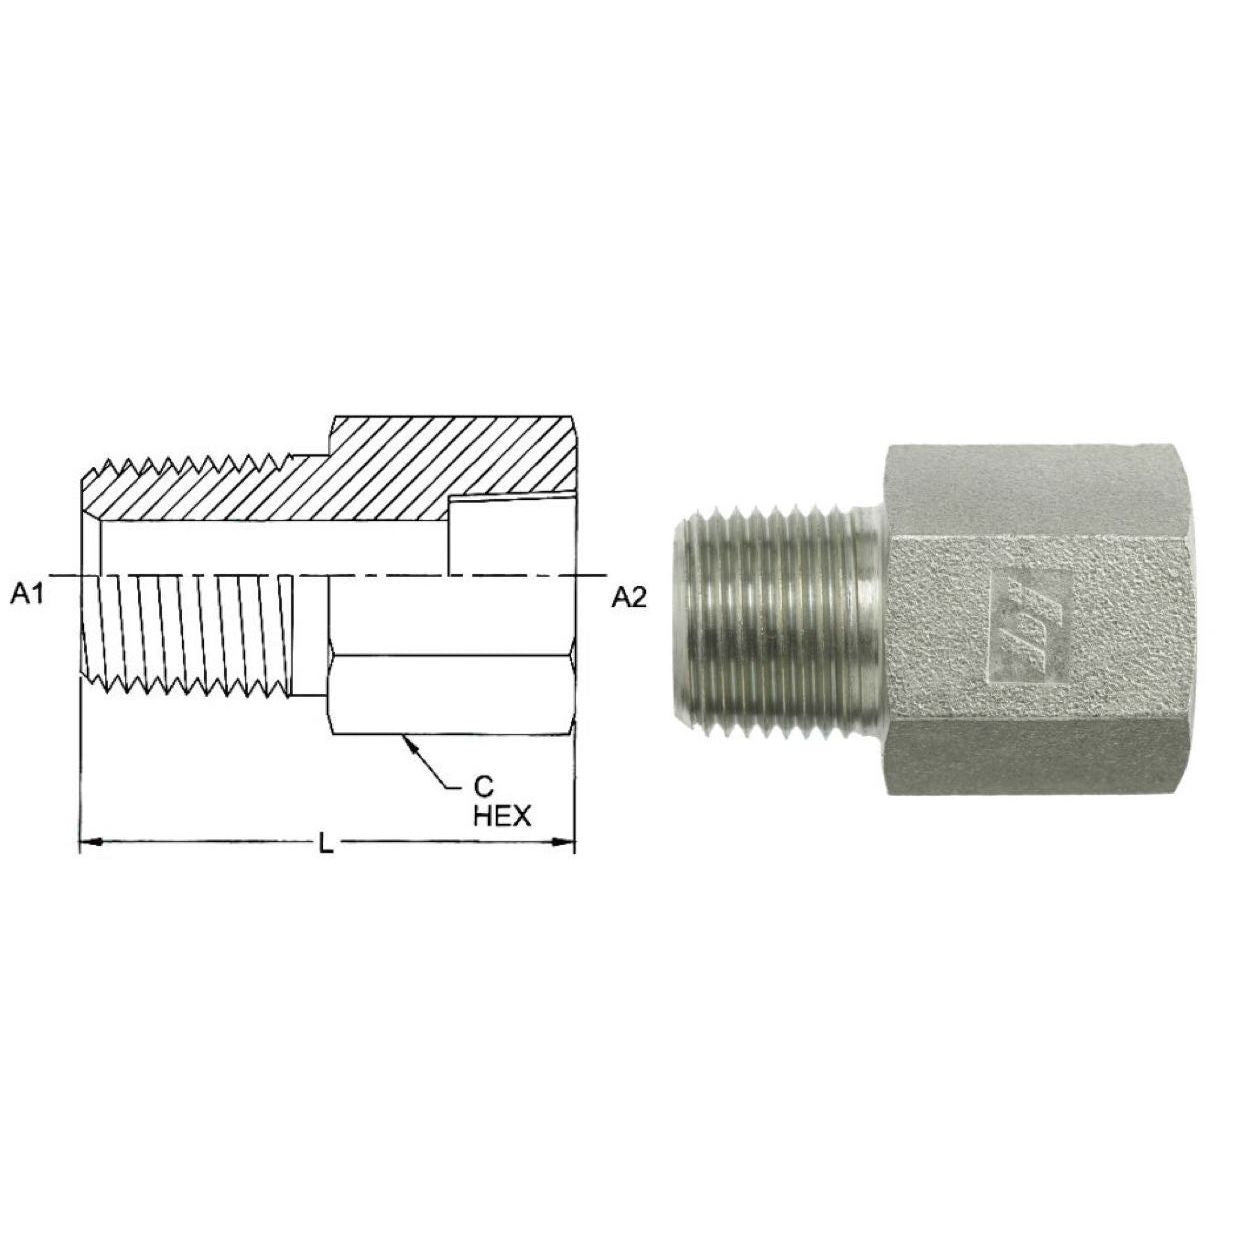 5405-06-02 : OneHydraulics Adapter, Straight Expander, 0.375 (3/8") Male NPT x 0.125 (1/8") Female, Steel, 6000psi